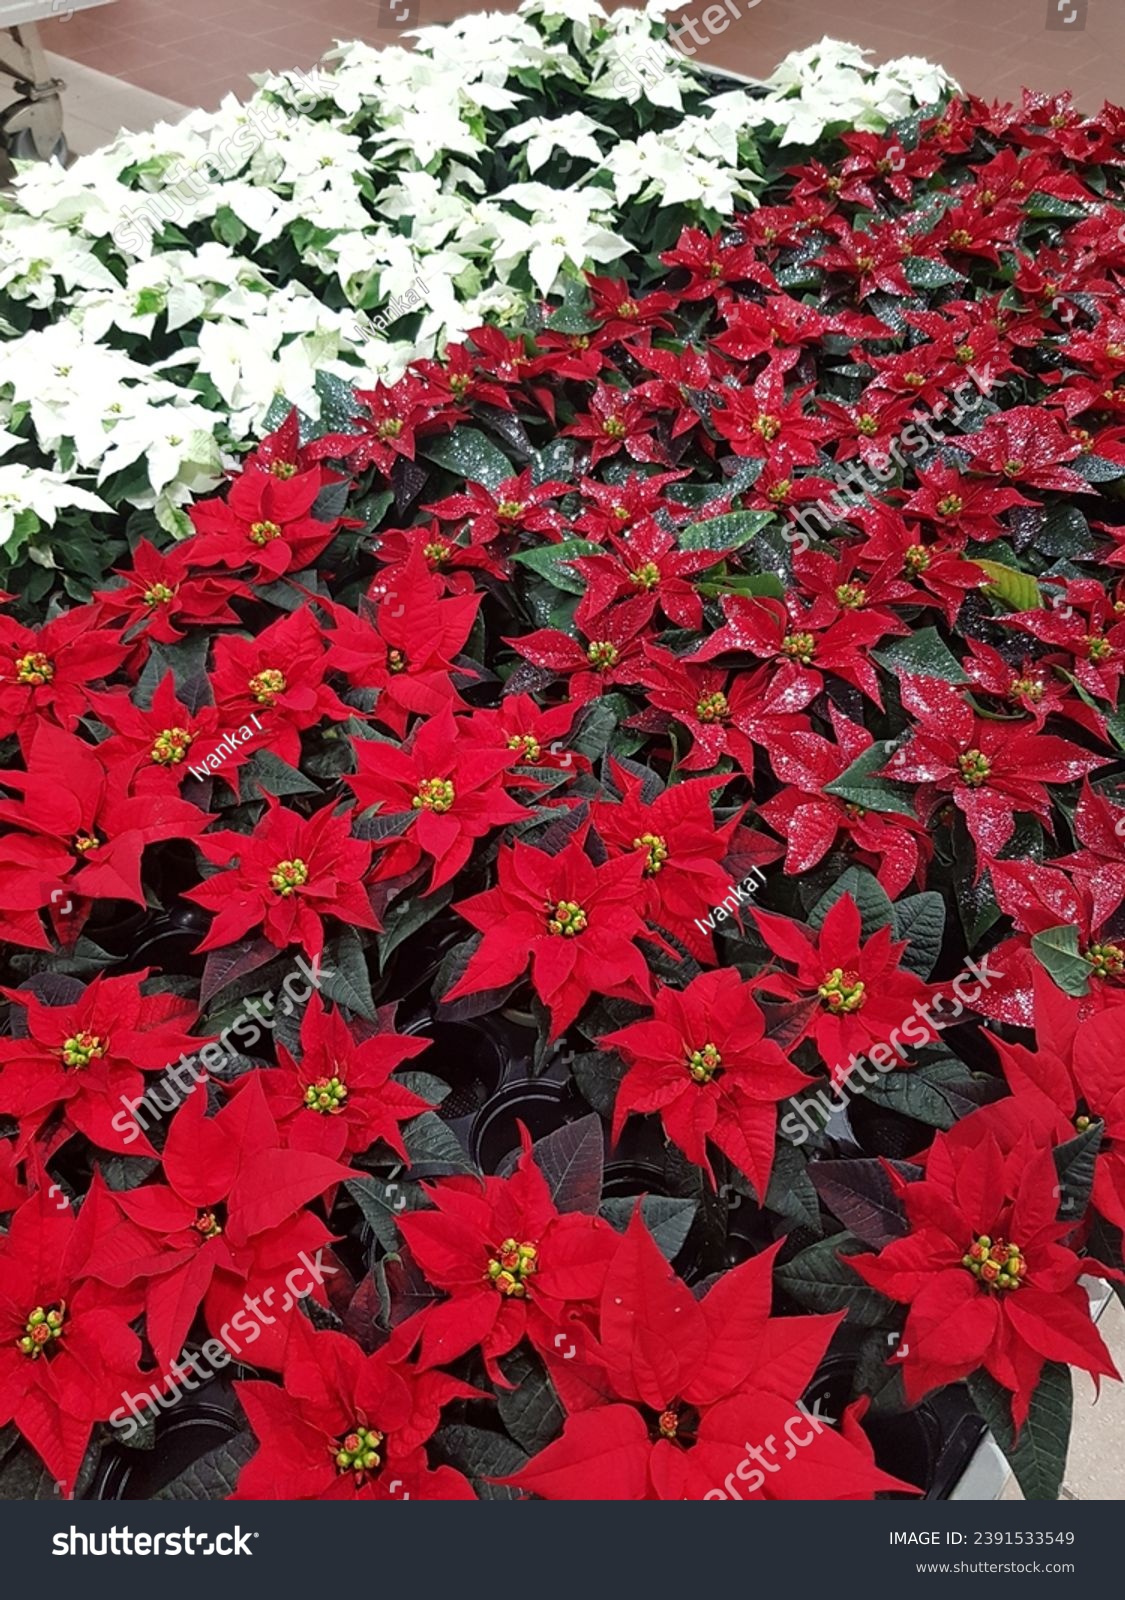 Poinsettia in a pot. Red and white Poinsettia Flowers on a Christmas Market. #2391533549